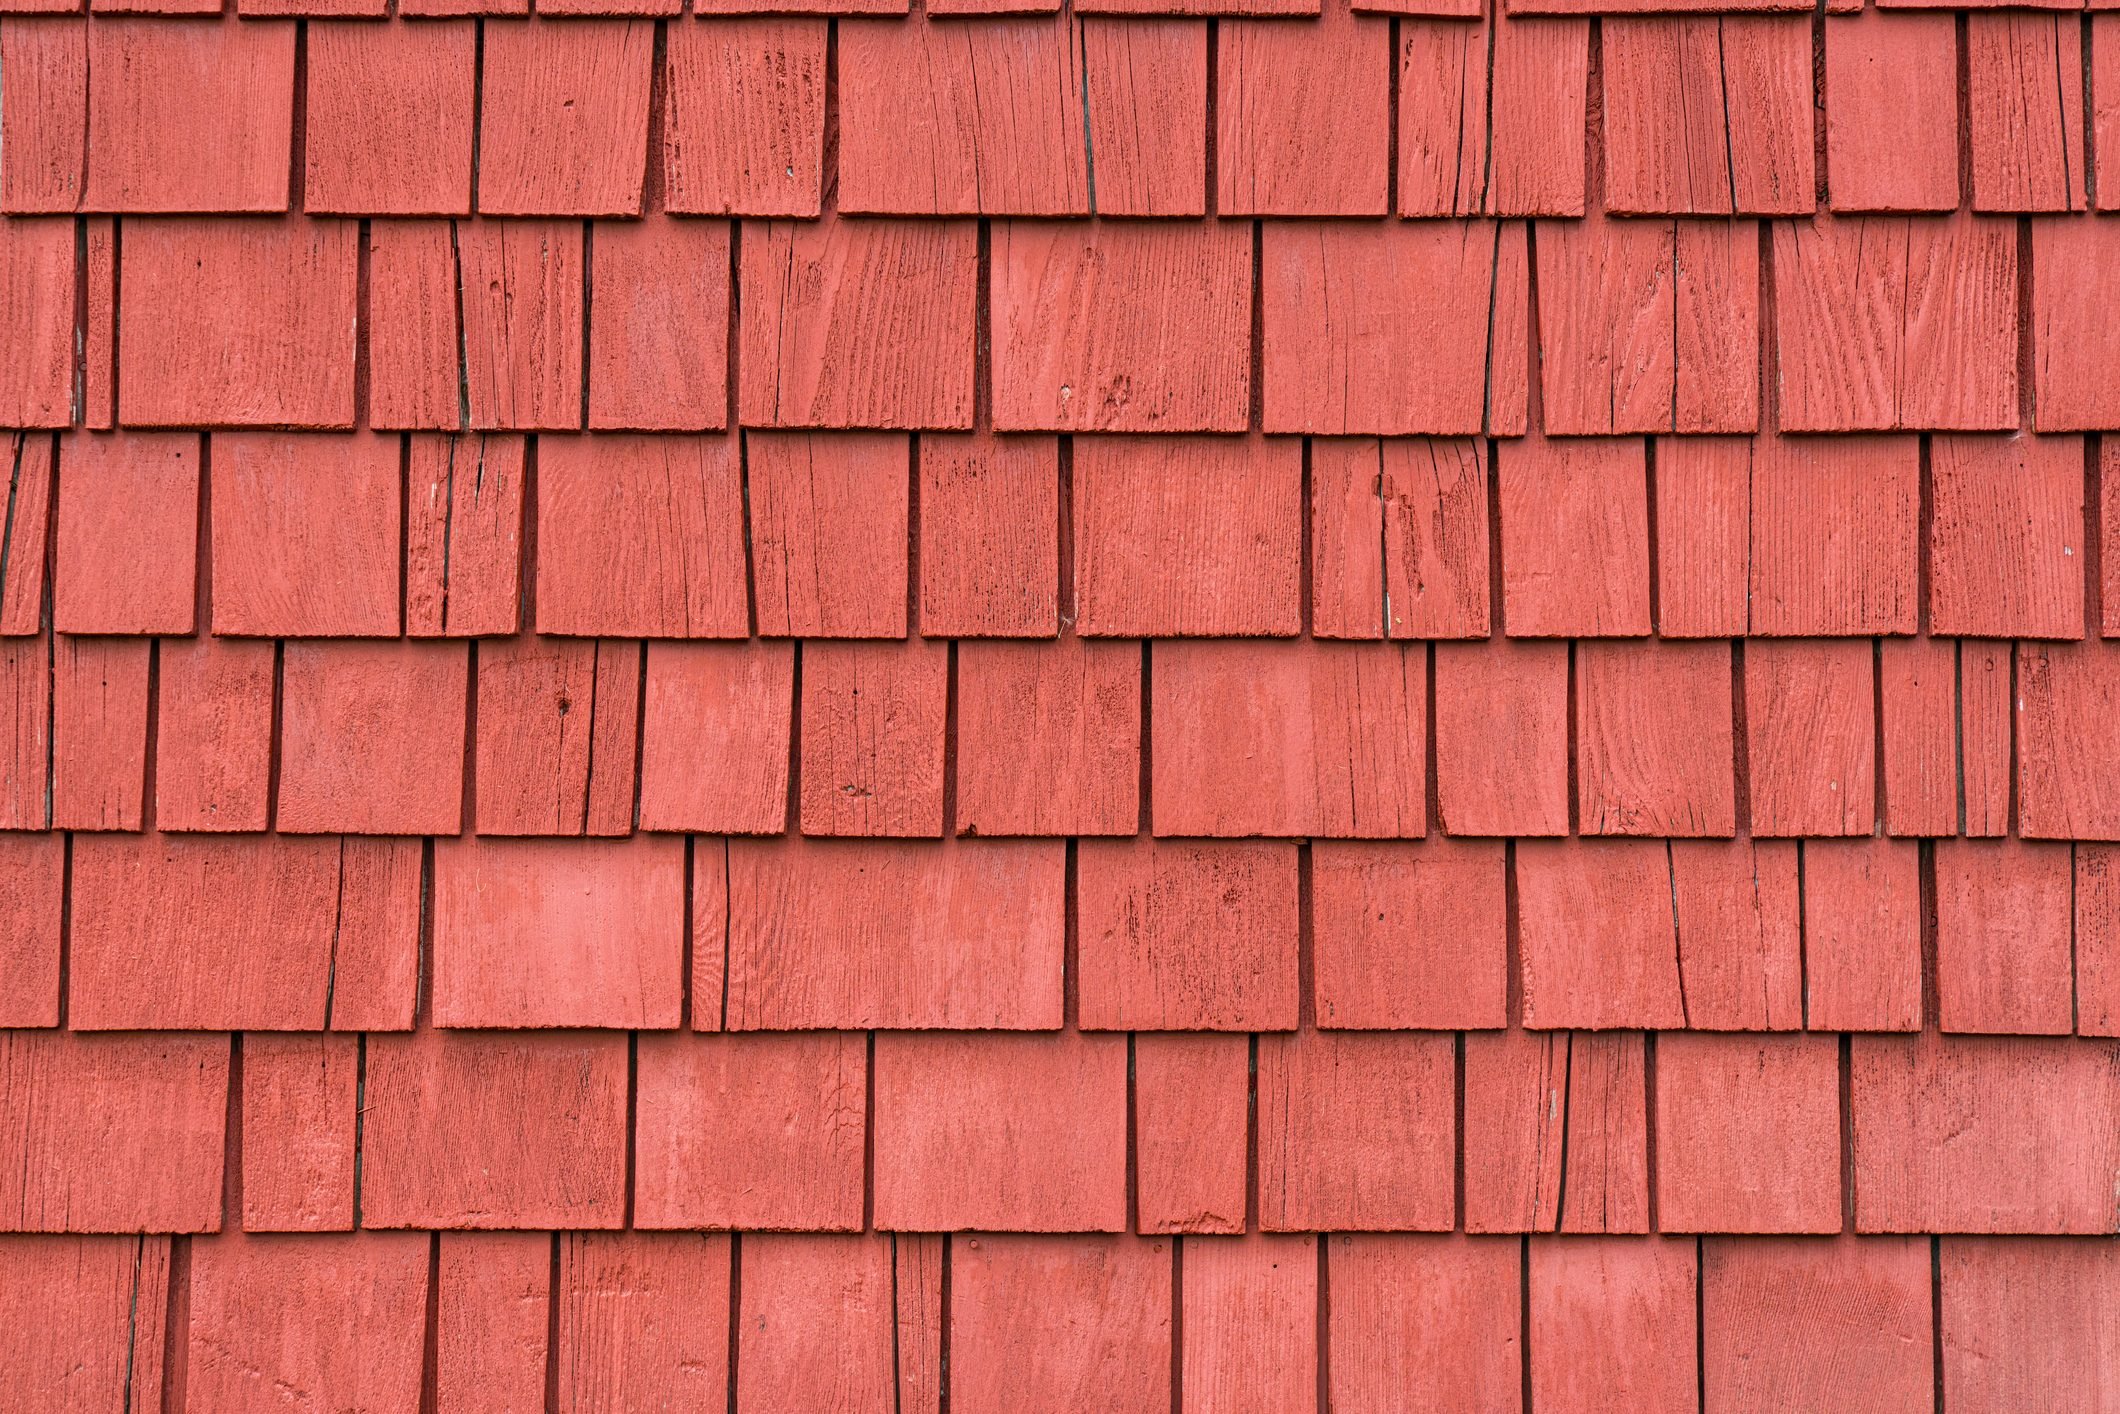 A Guide for Getting Great Results Painting Cedar Siding